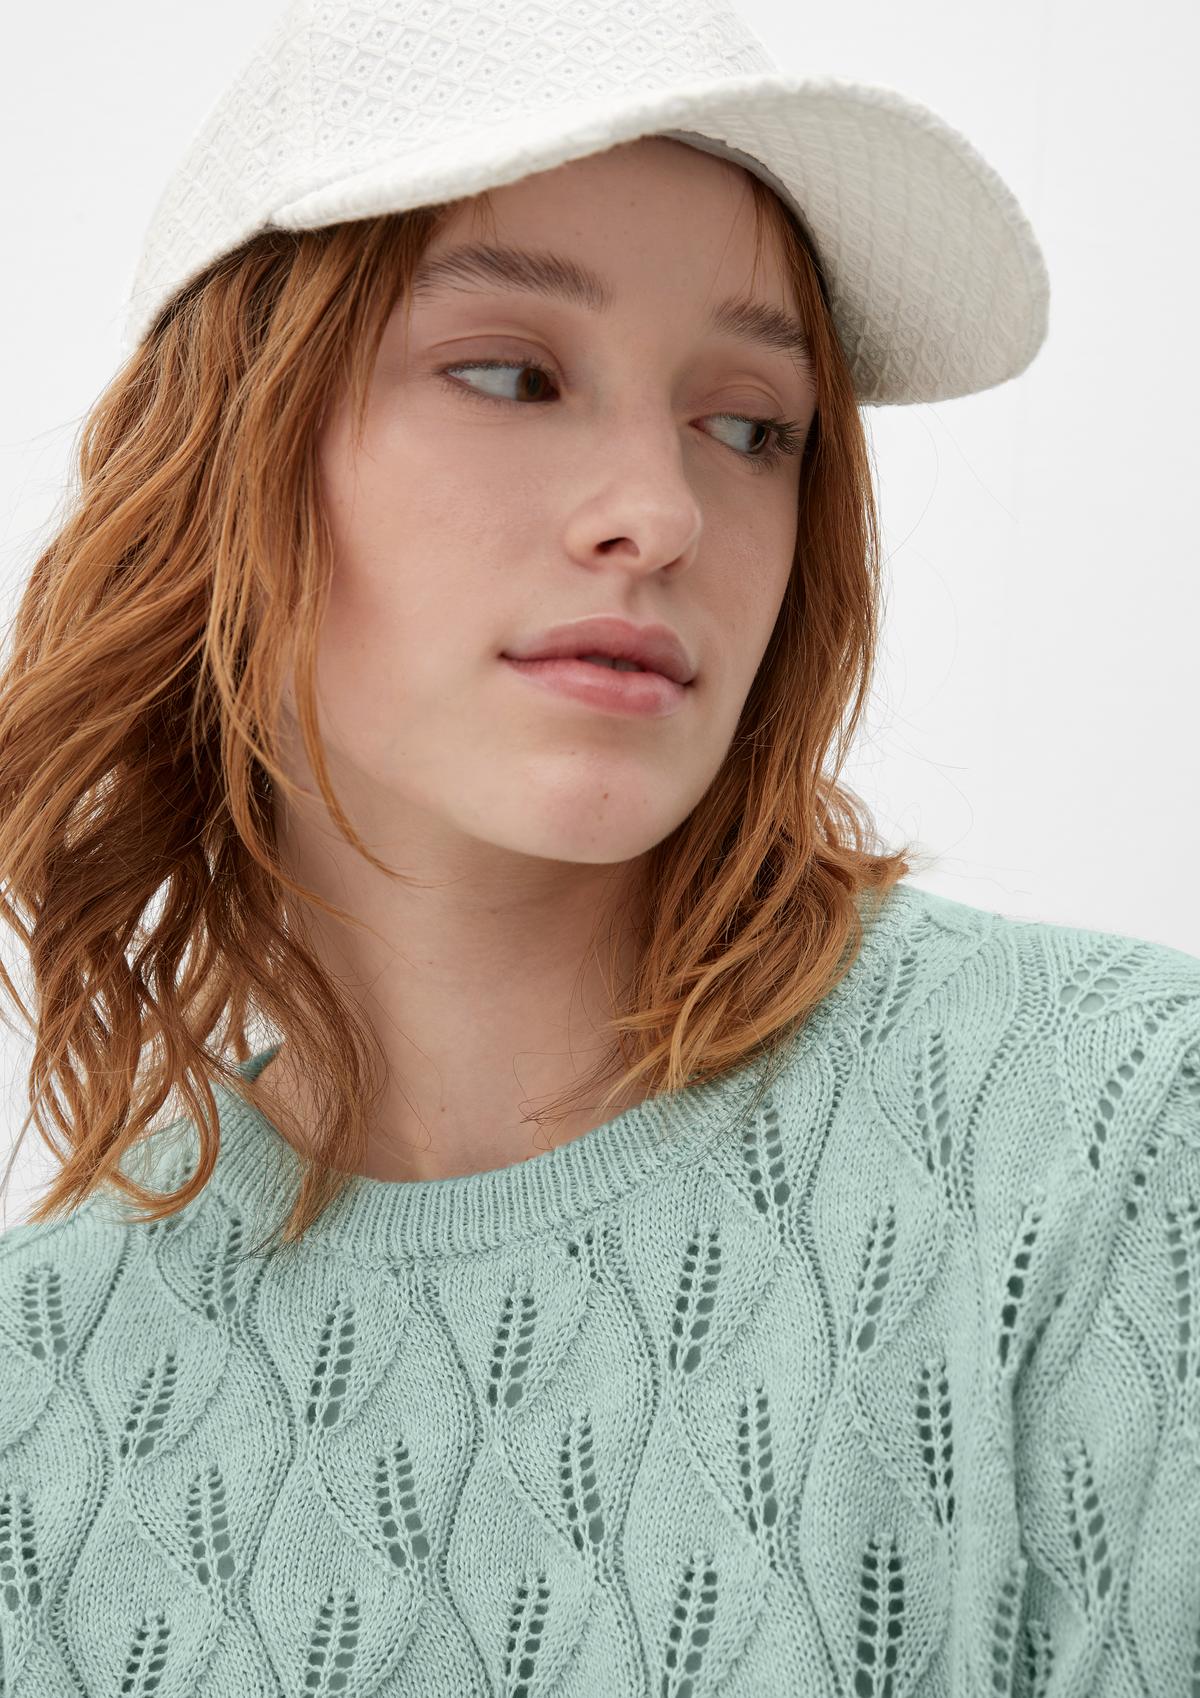 s.Oliver Knitted jumper with an openwork pattern